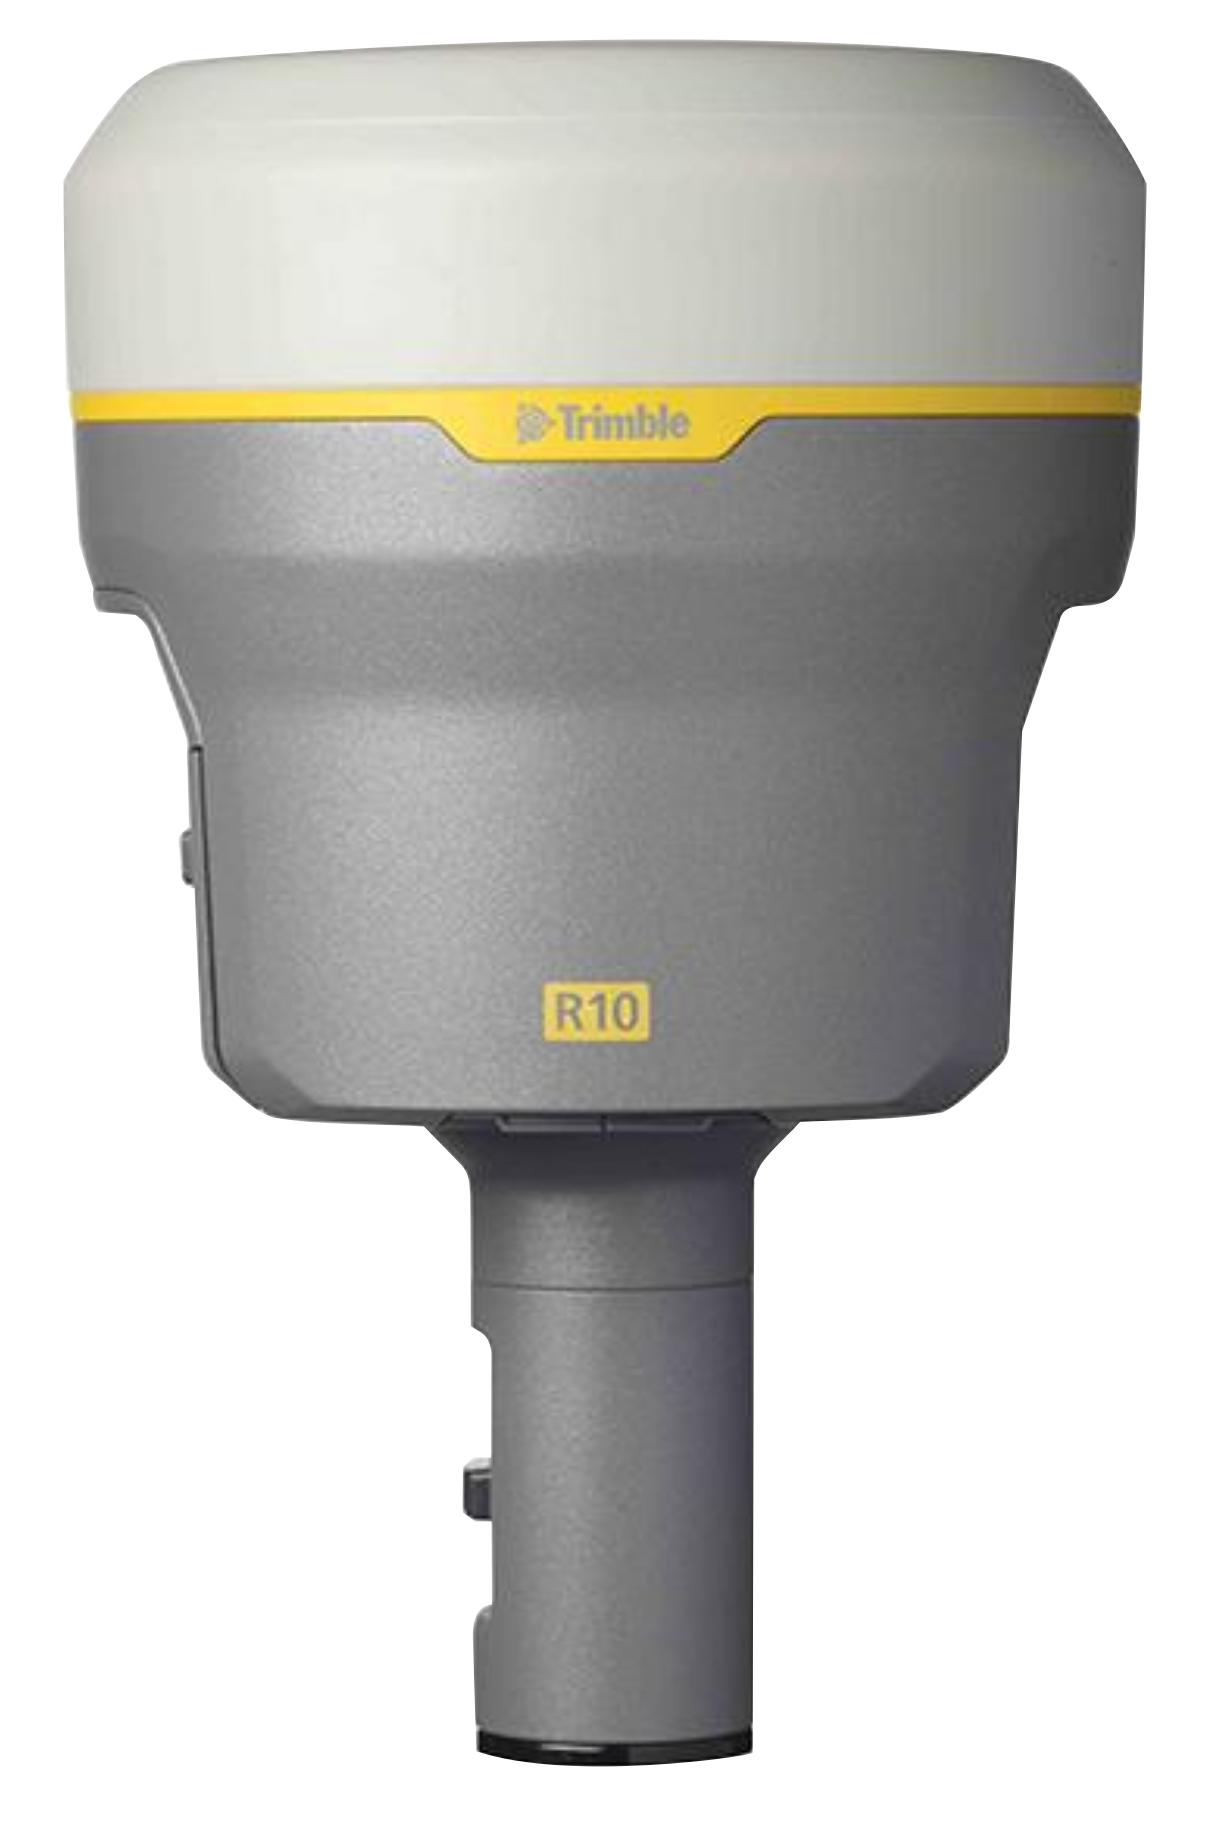 Trimble R10LT GNSS System: A New Level Of Productivity Now and in the Future